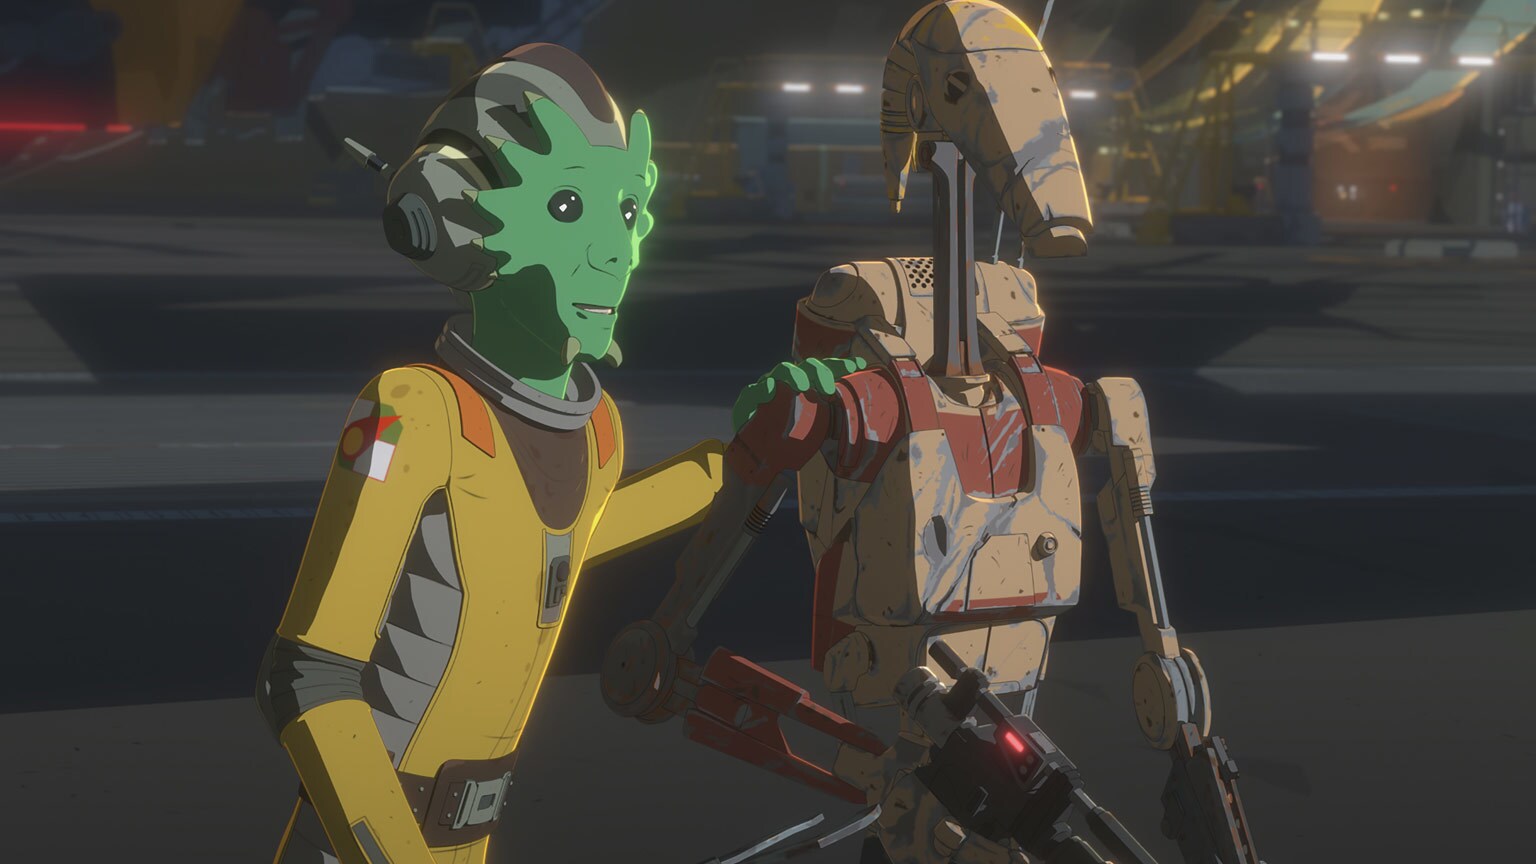 Bucket's List Extra: 5 Fun Facts from "The Mutiny" - Star Wars Resistance